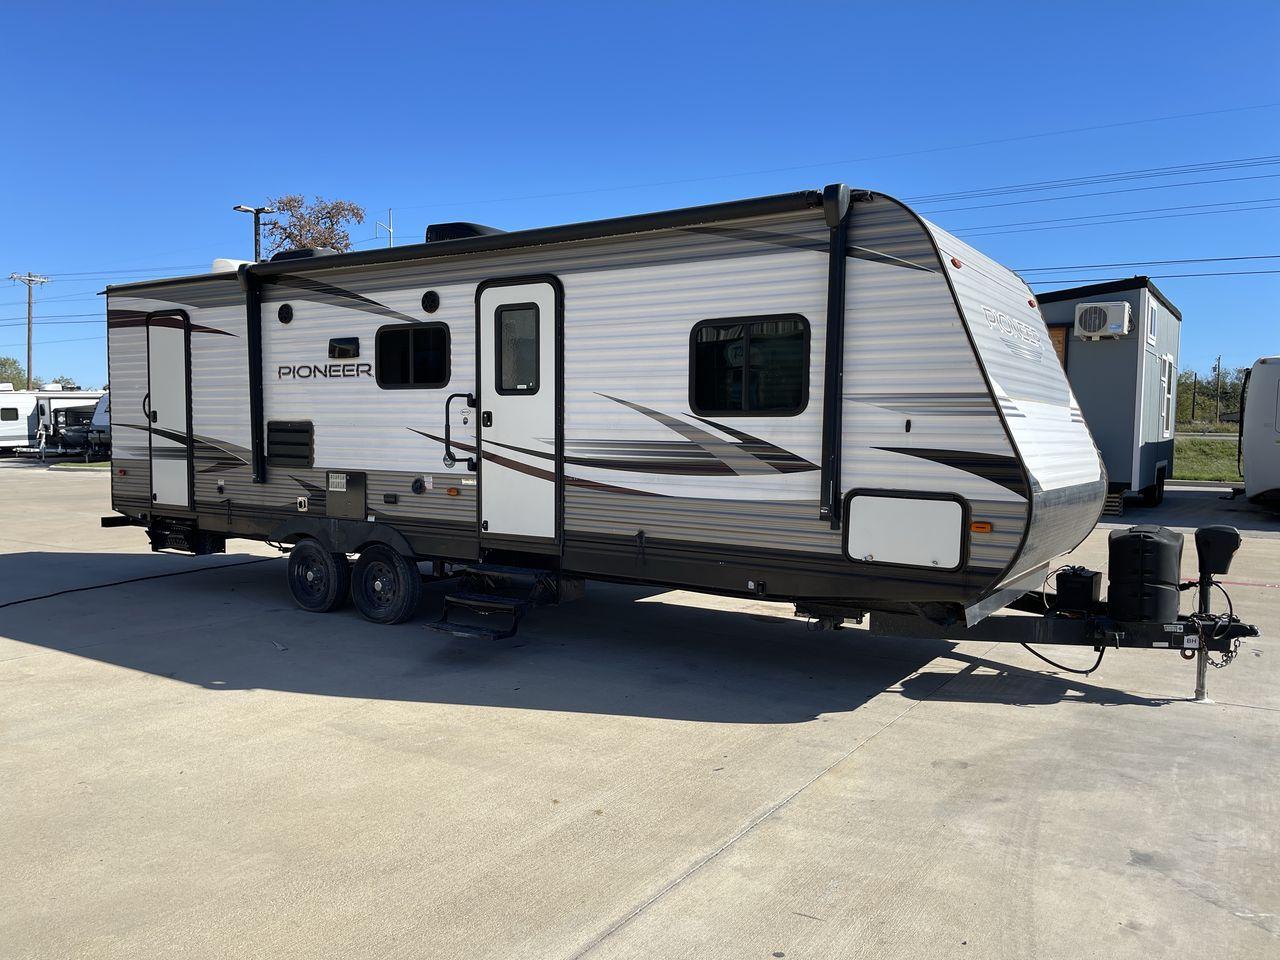 2019 HEARTLAND PIONEER BH270 (5SFPB322XKE) , Length: 31.6 ft | Dry Weight: 6,354 lbs | GVWR: 7,700 lbs | Slides: 1 transmission, located at 4319 N Main St, Cleburne, TX, 76033, (817) 678-5133, 32.385960, -97.391212 - The 2019 Heartland Pioneer BH270 travel trailer is made to be a cozy and welcoming camping companion for families. This model has a friendly floor plan, making it a desirable option for individuals looking for a large and practical living area while traveling. This unit measures 31.6 ft in length - Photo #0